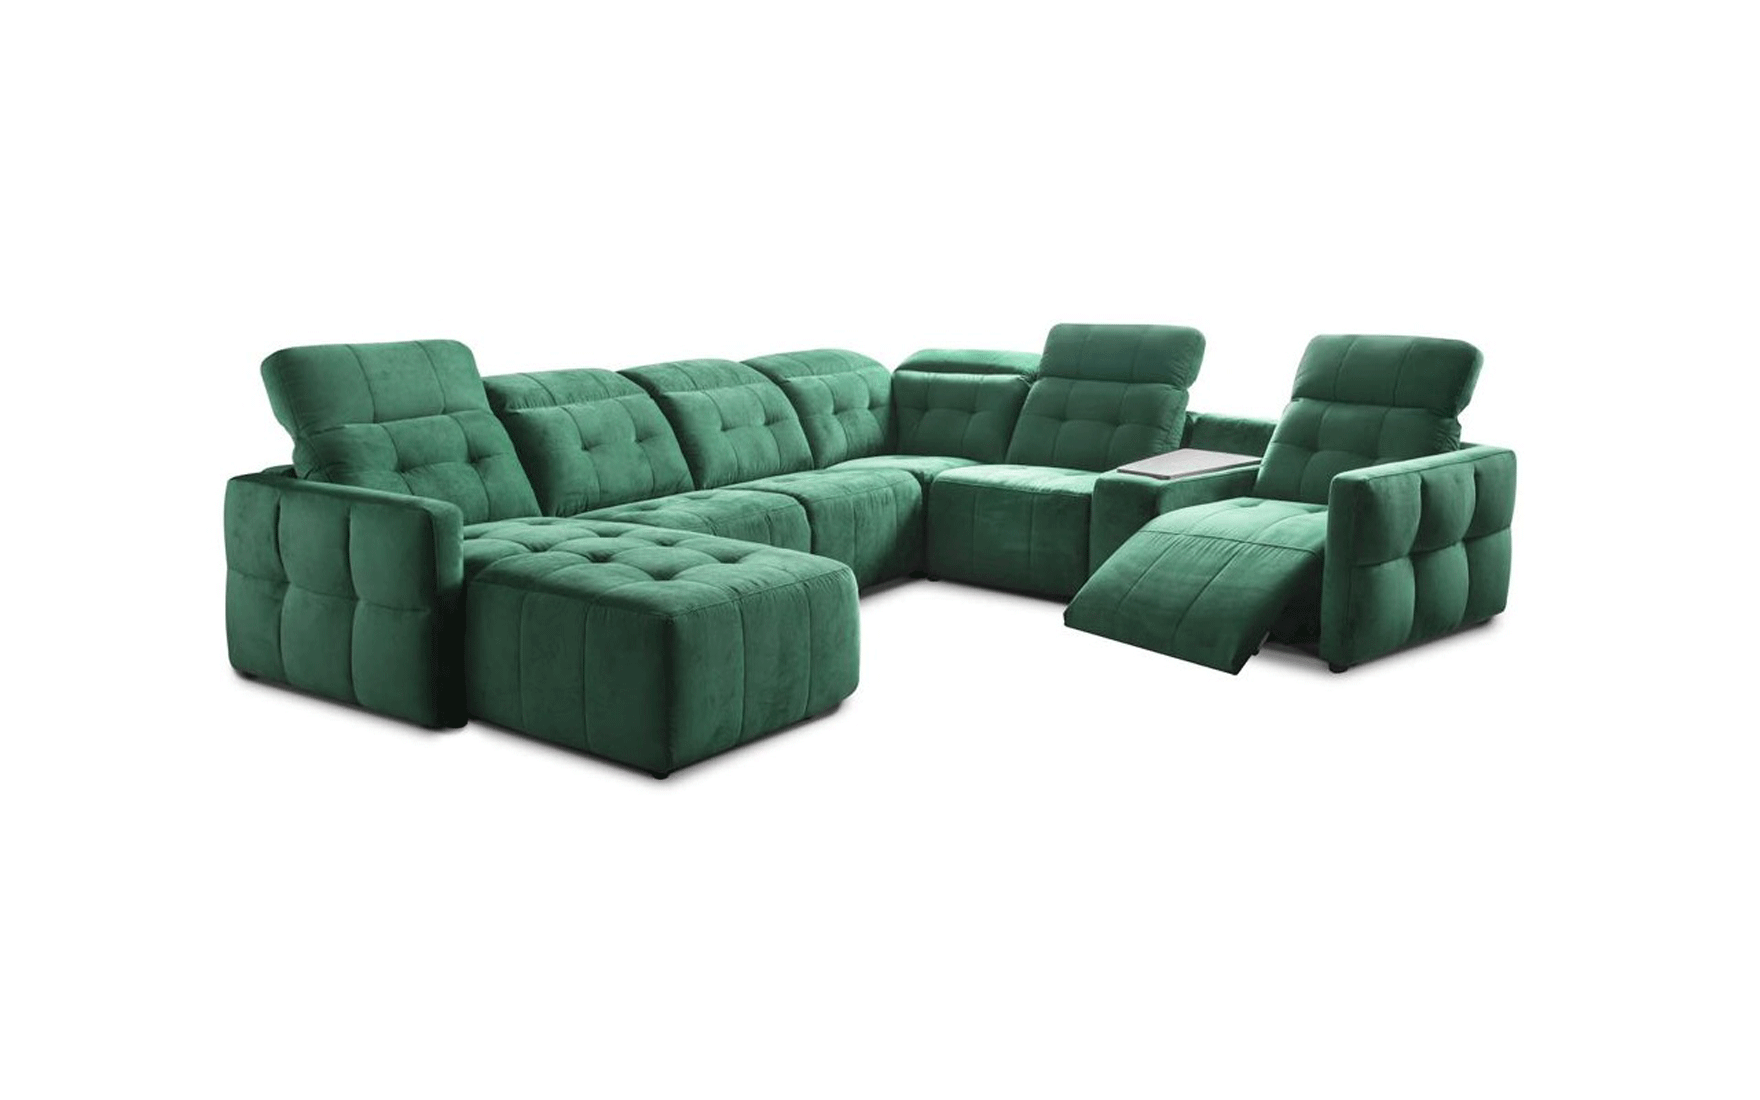 Extravagant Tufted Microfiber Sectional Sofa with Pillows